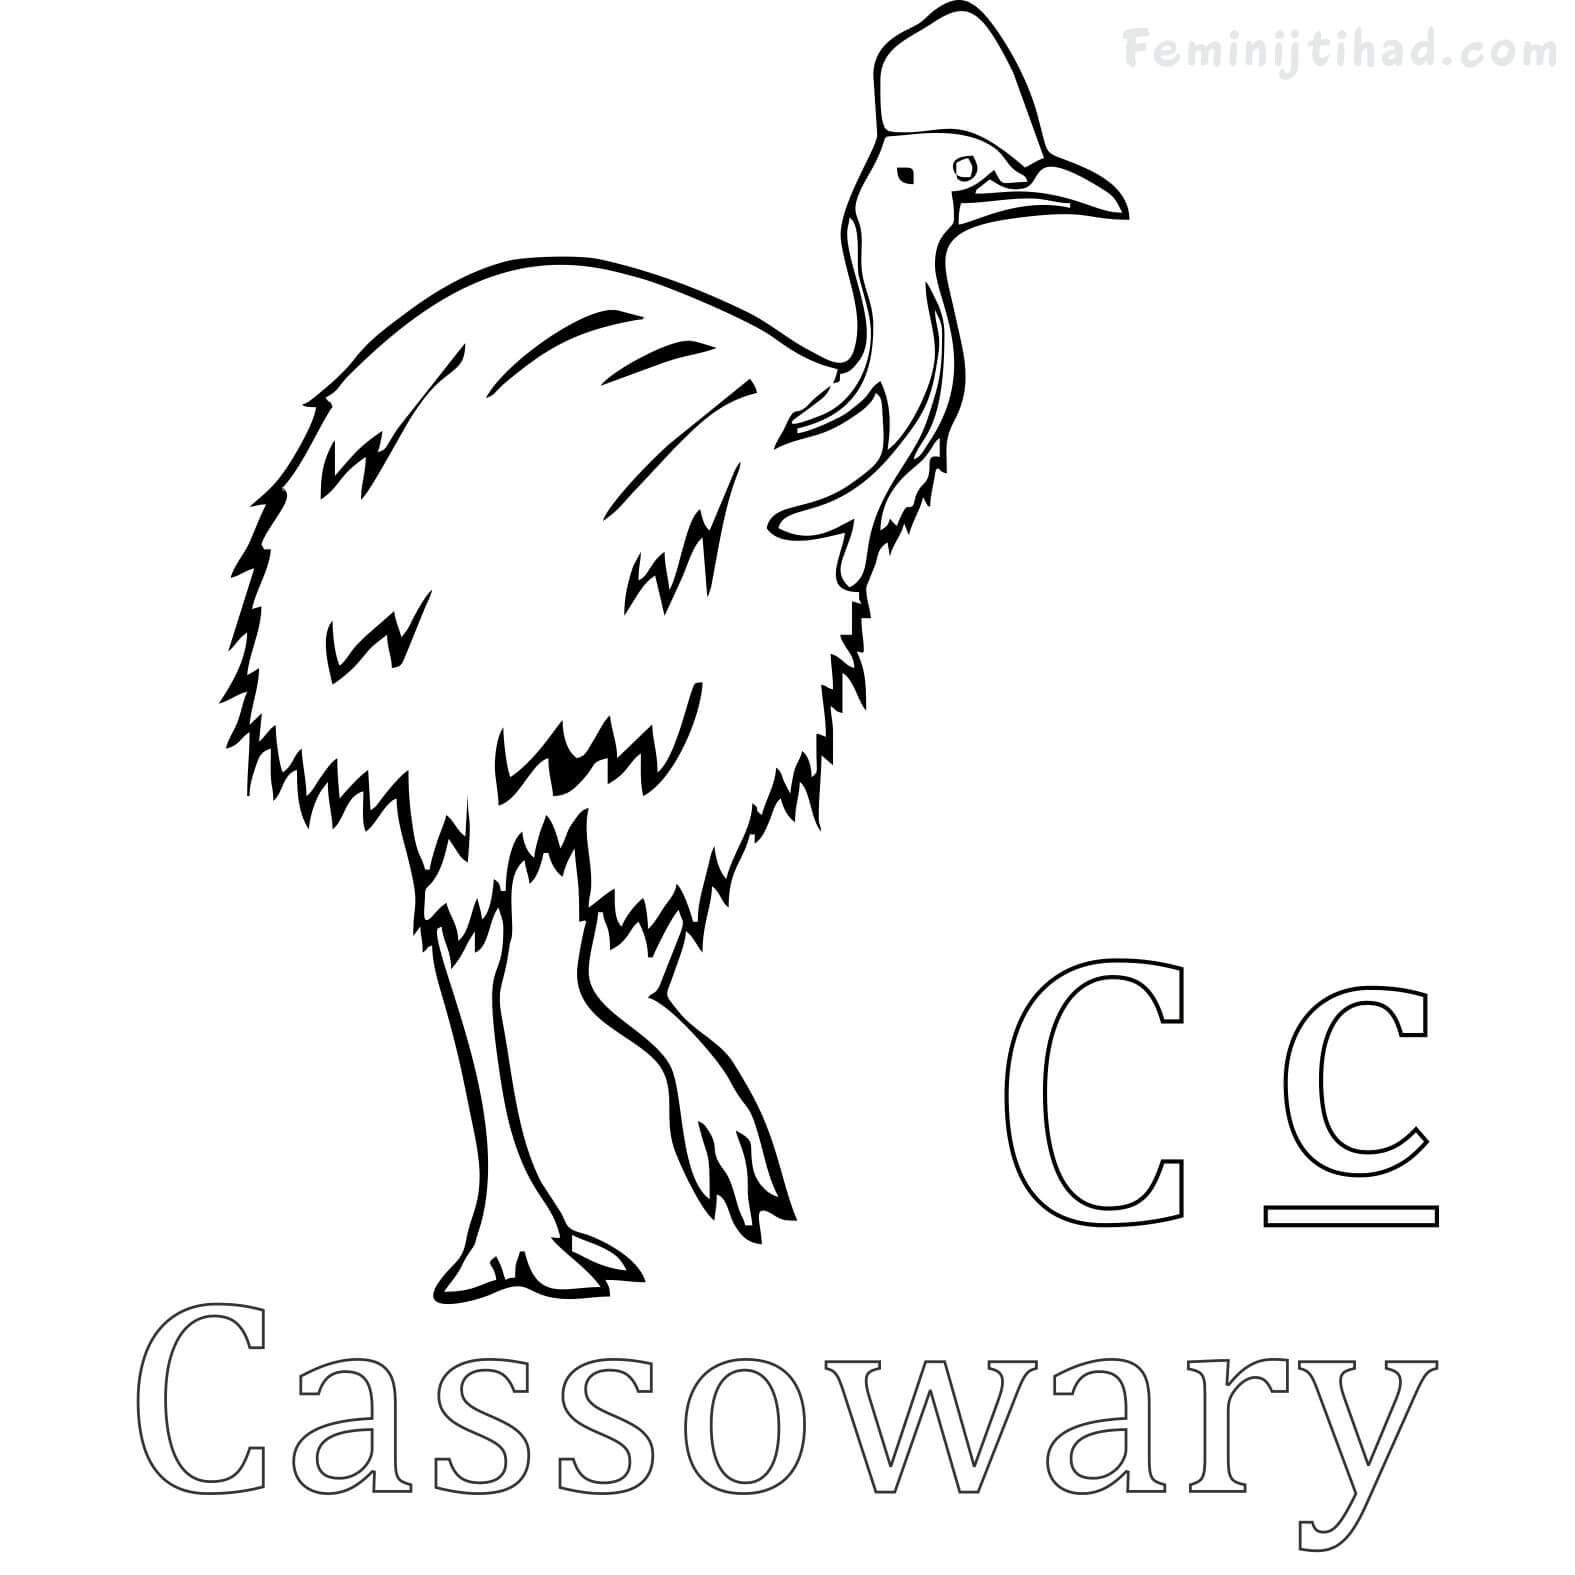 Cassowary Coloring Page Printable